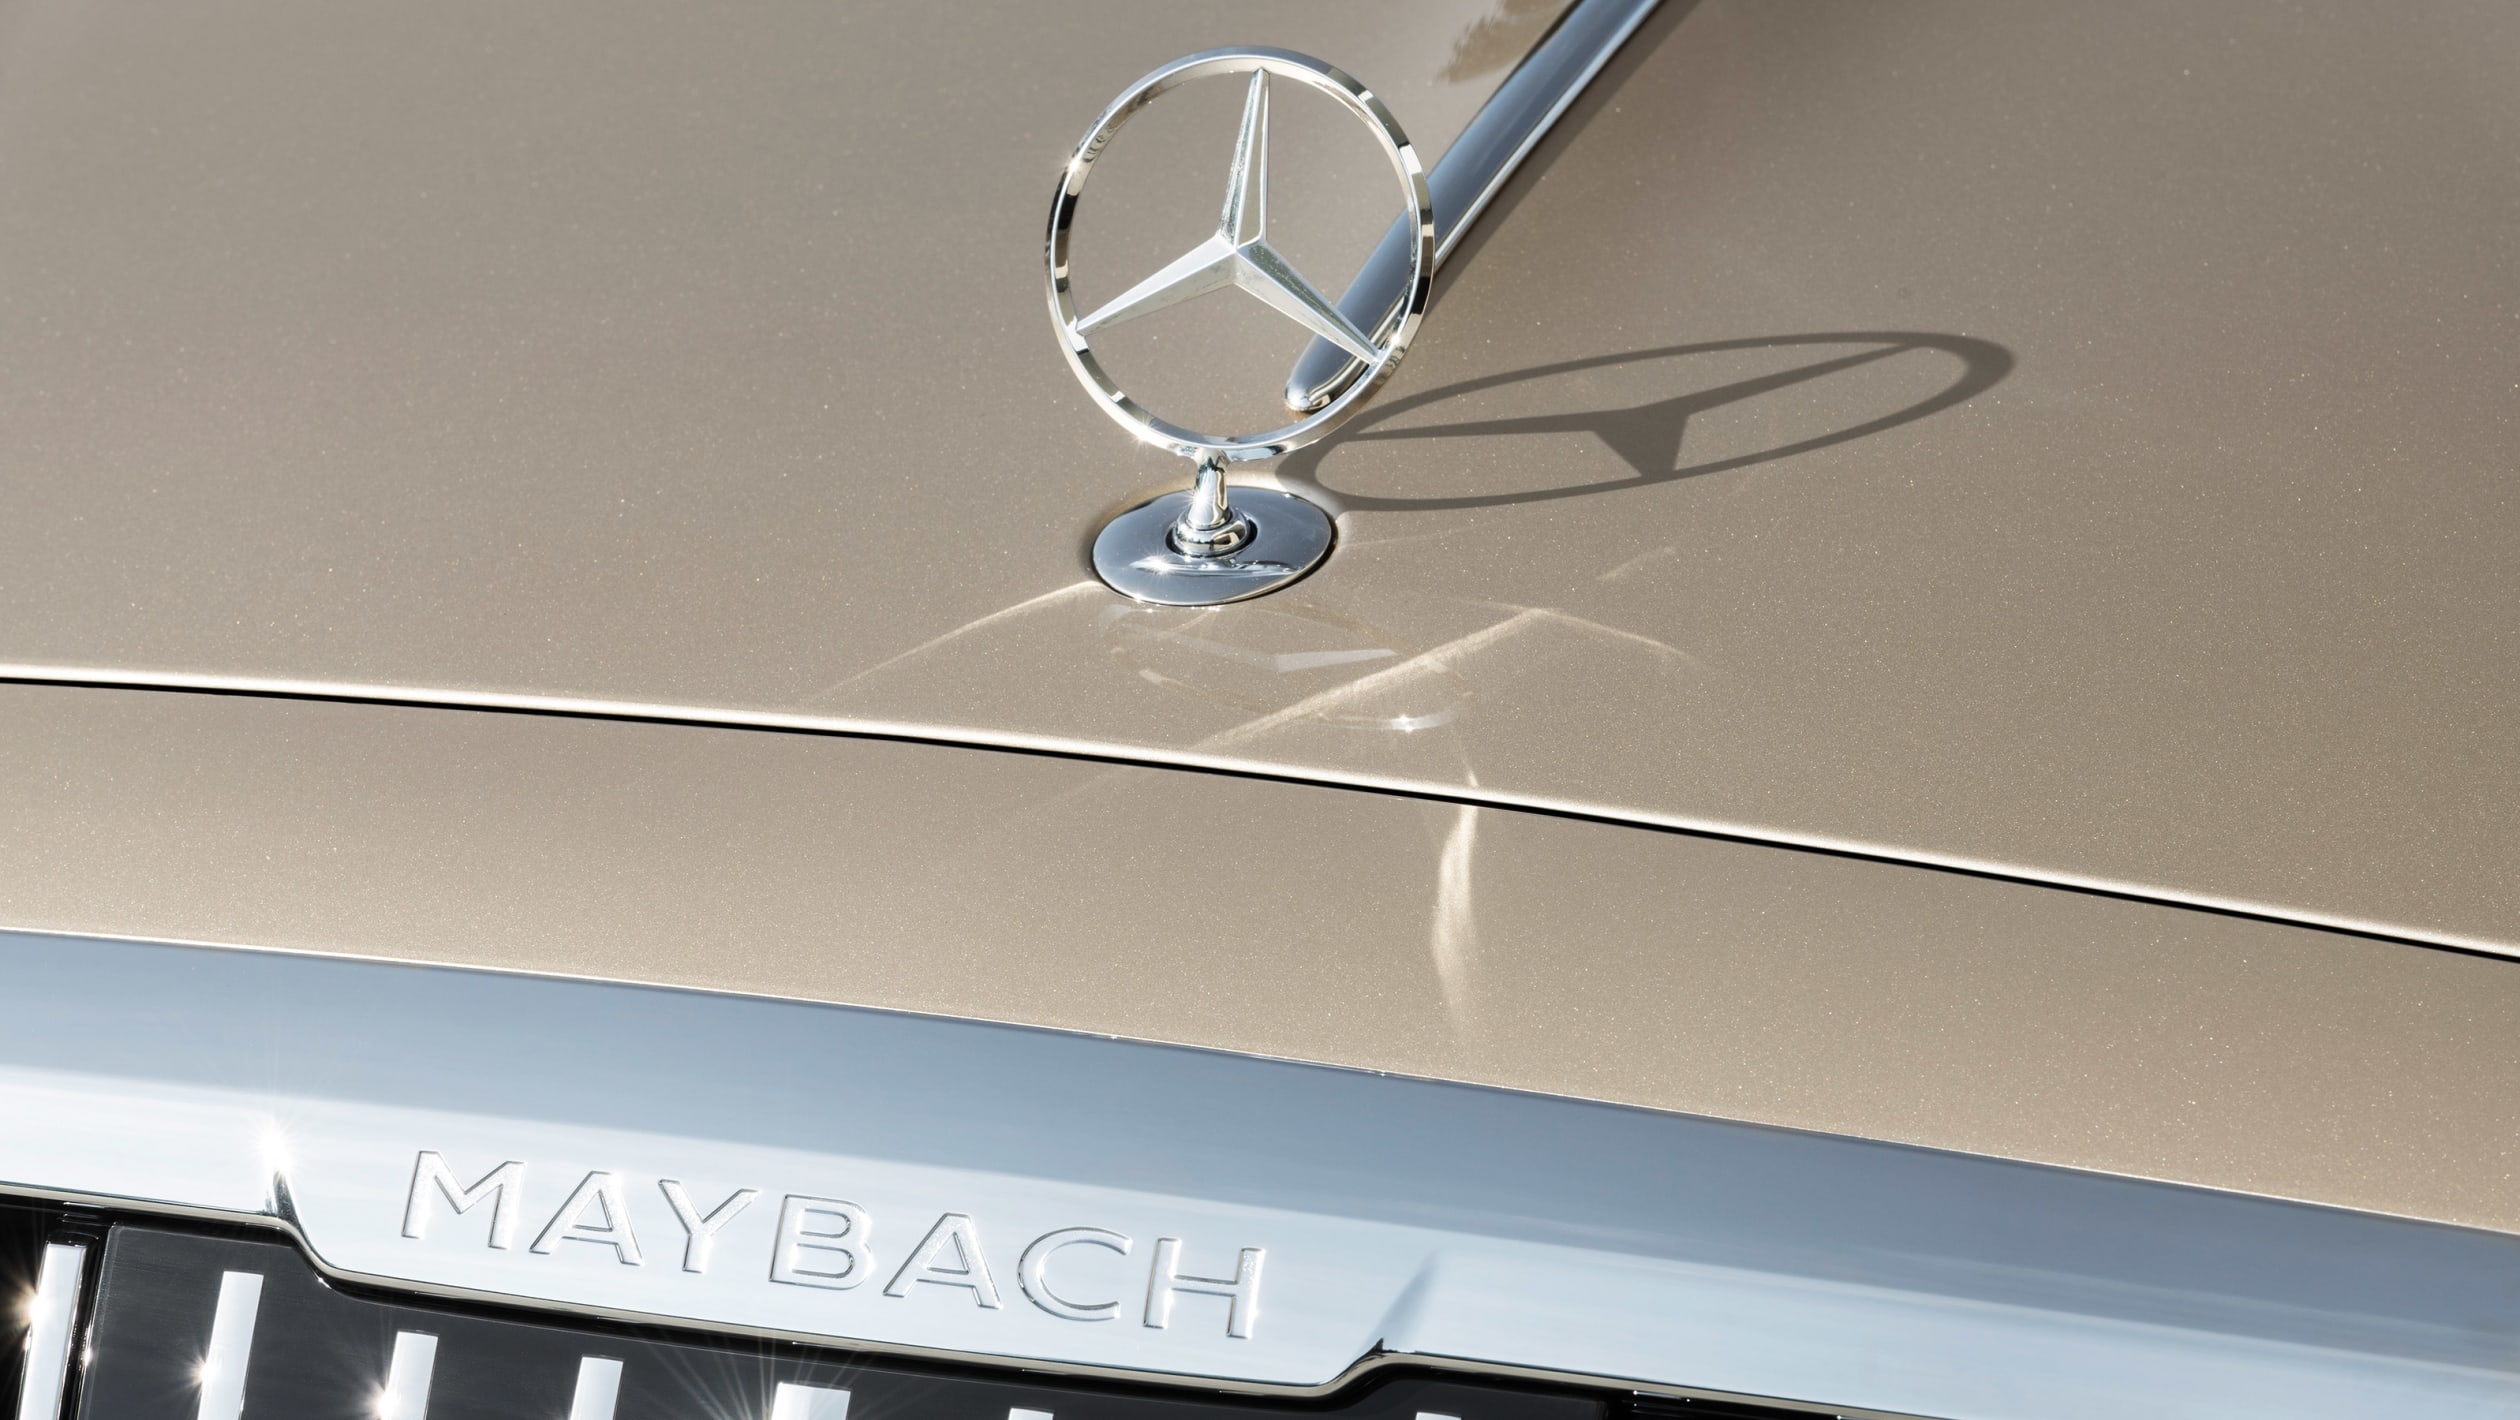 aria-label="New Mercedes Maybach S Class 7"